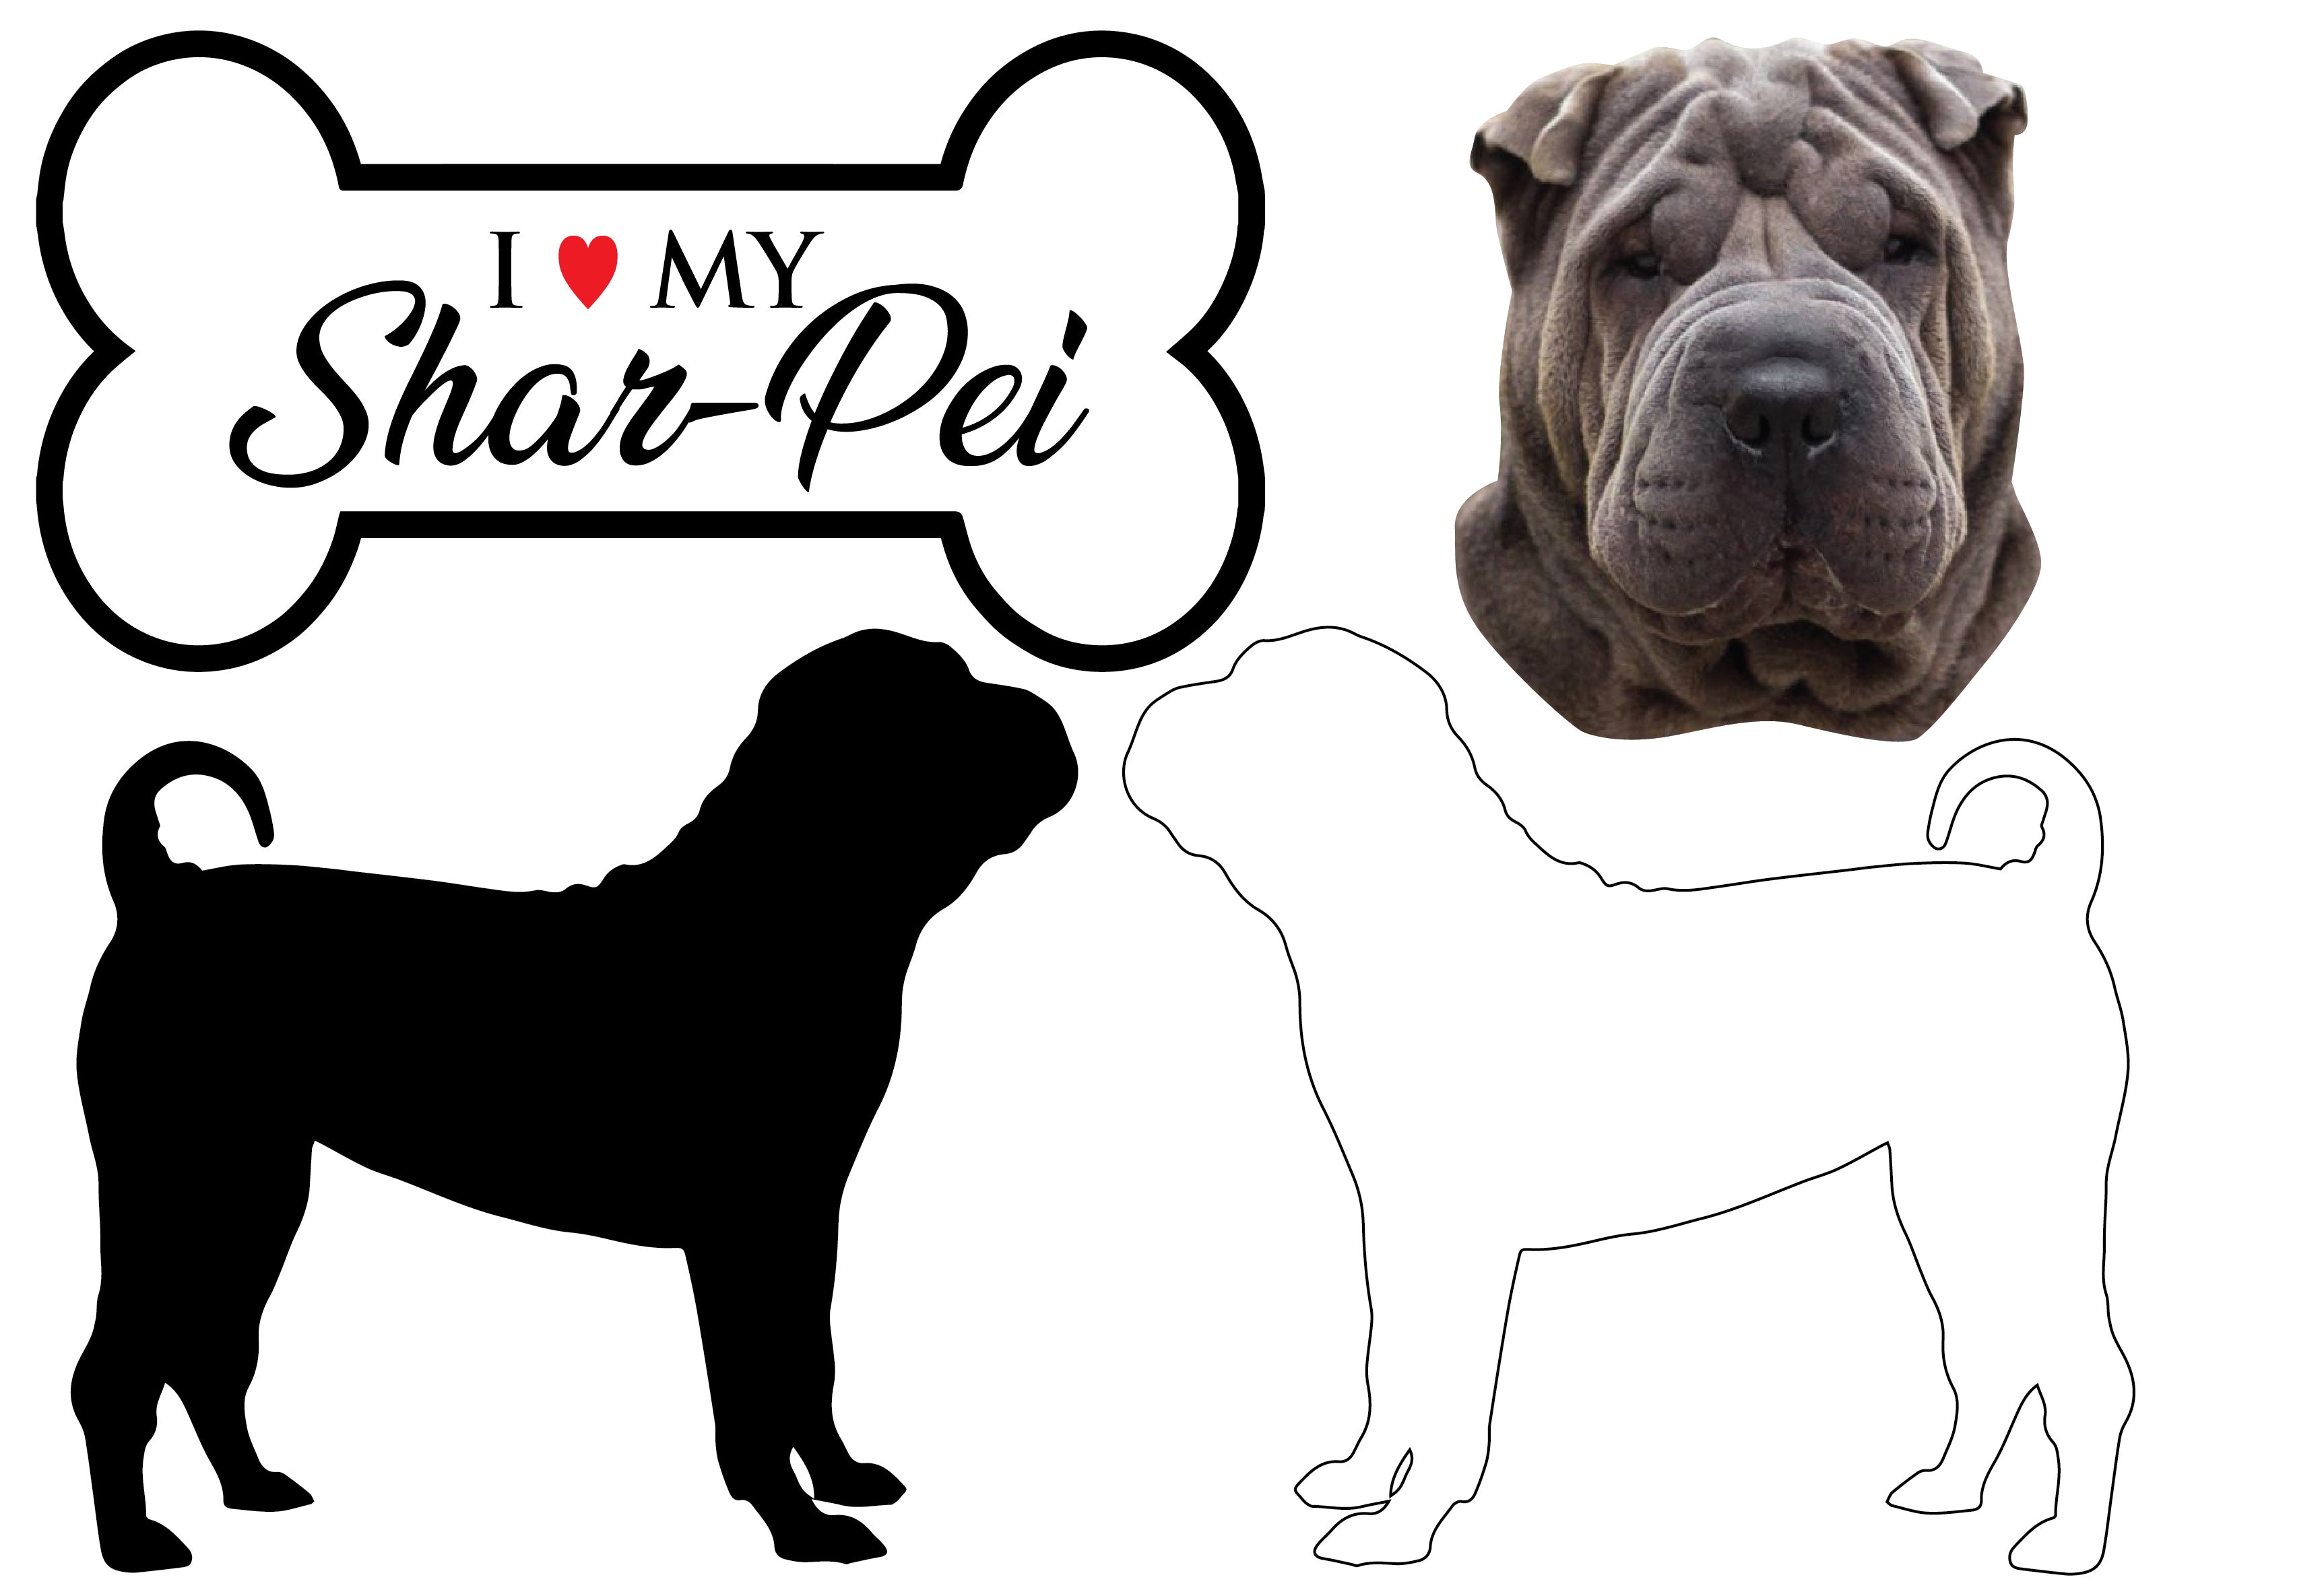 Shar-Pei - Dog Breed Decals (Set of 16) - Sizes in Description